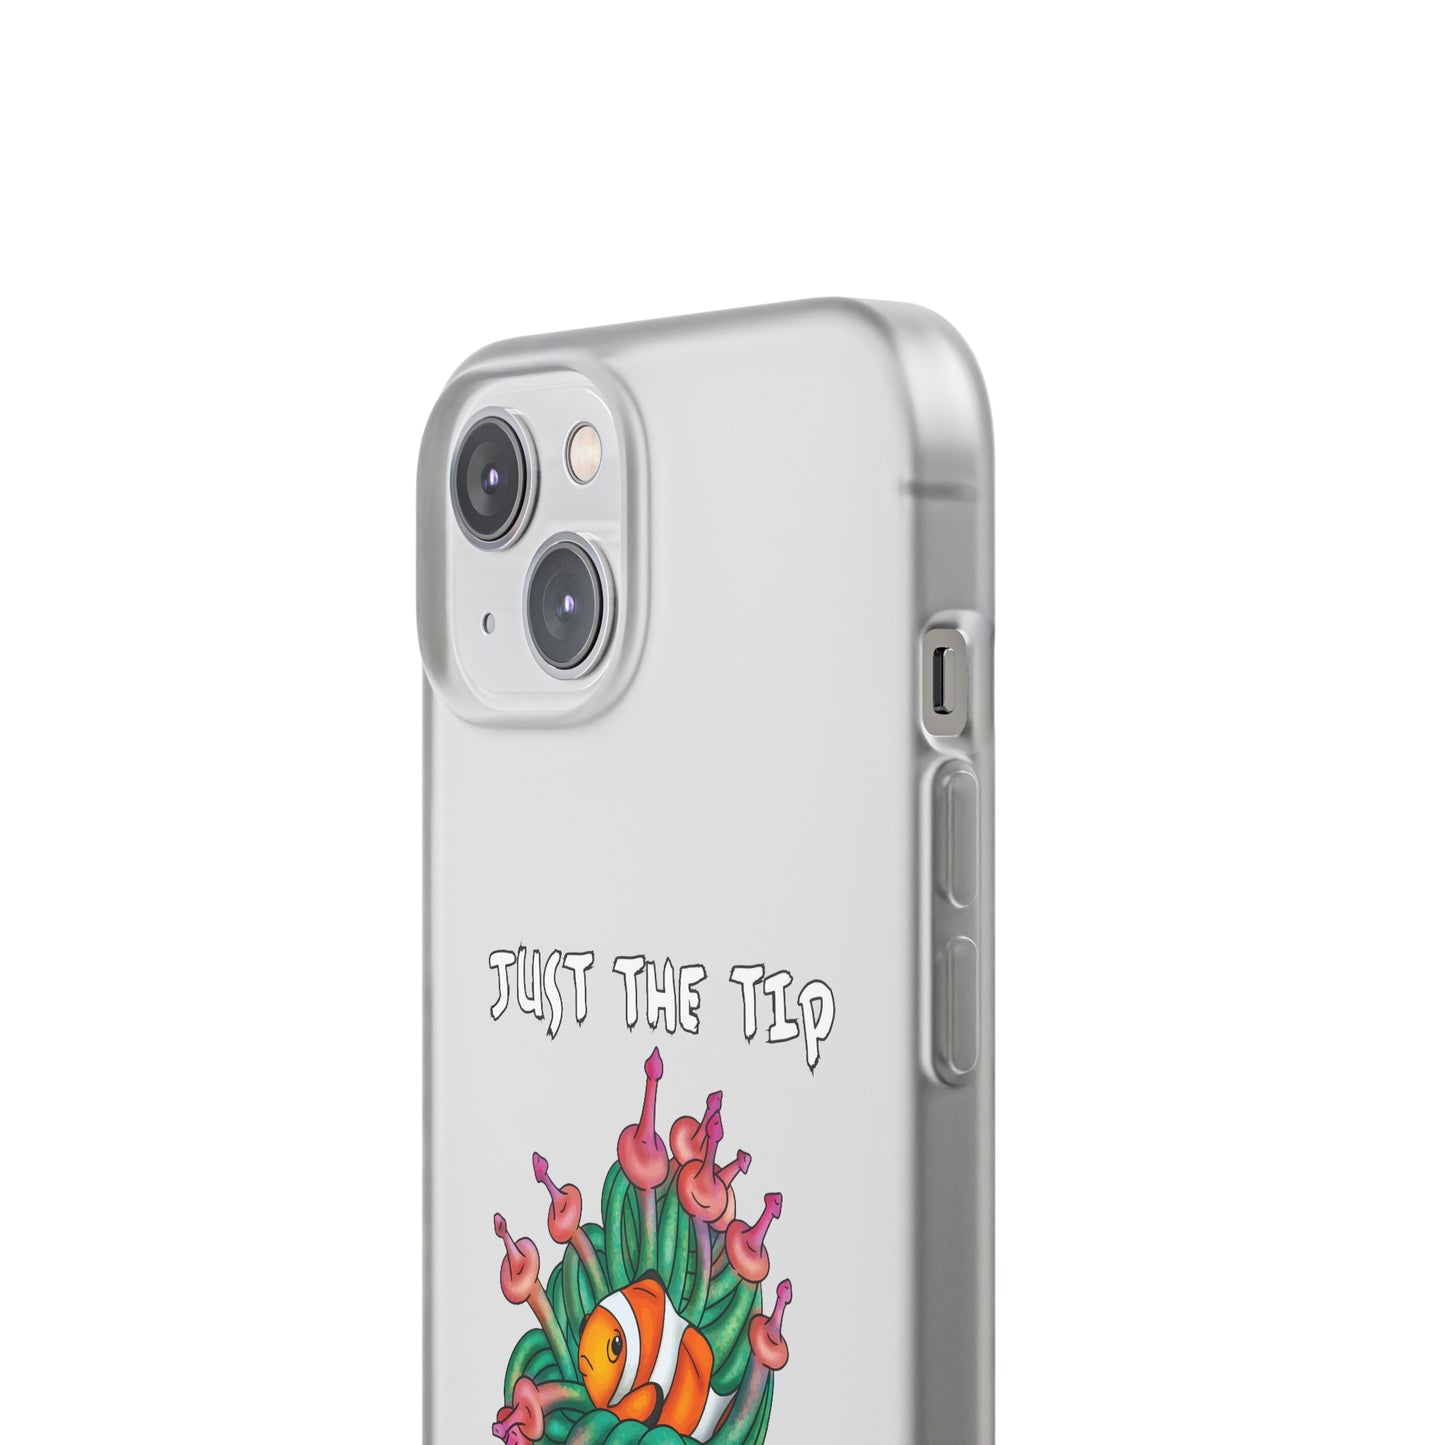 "Just The Tip" Bubble Tip Anemone Cell Phone Flexi Case